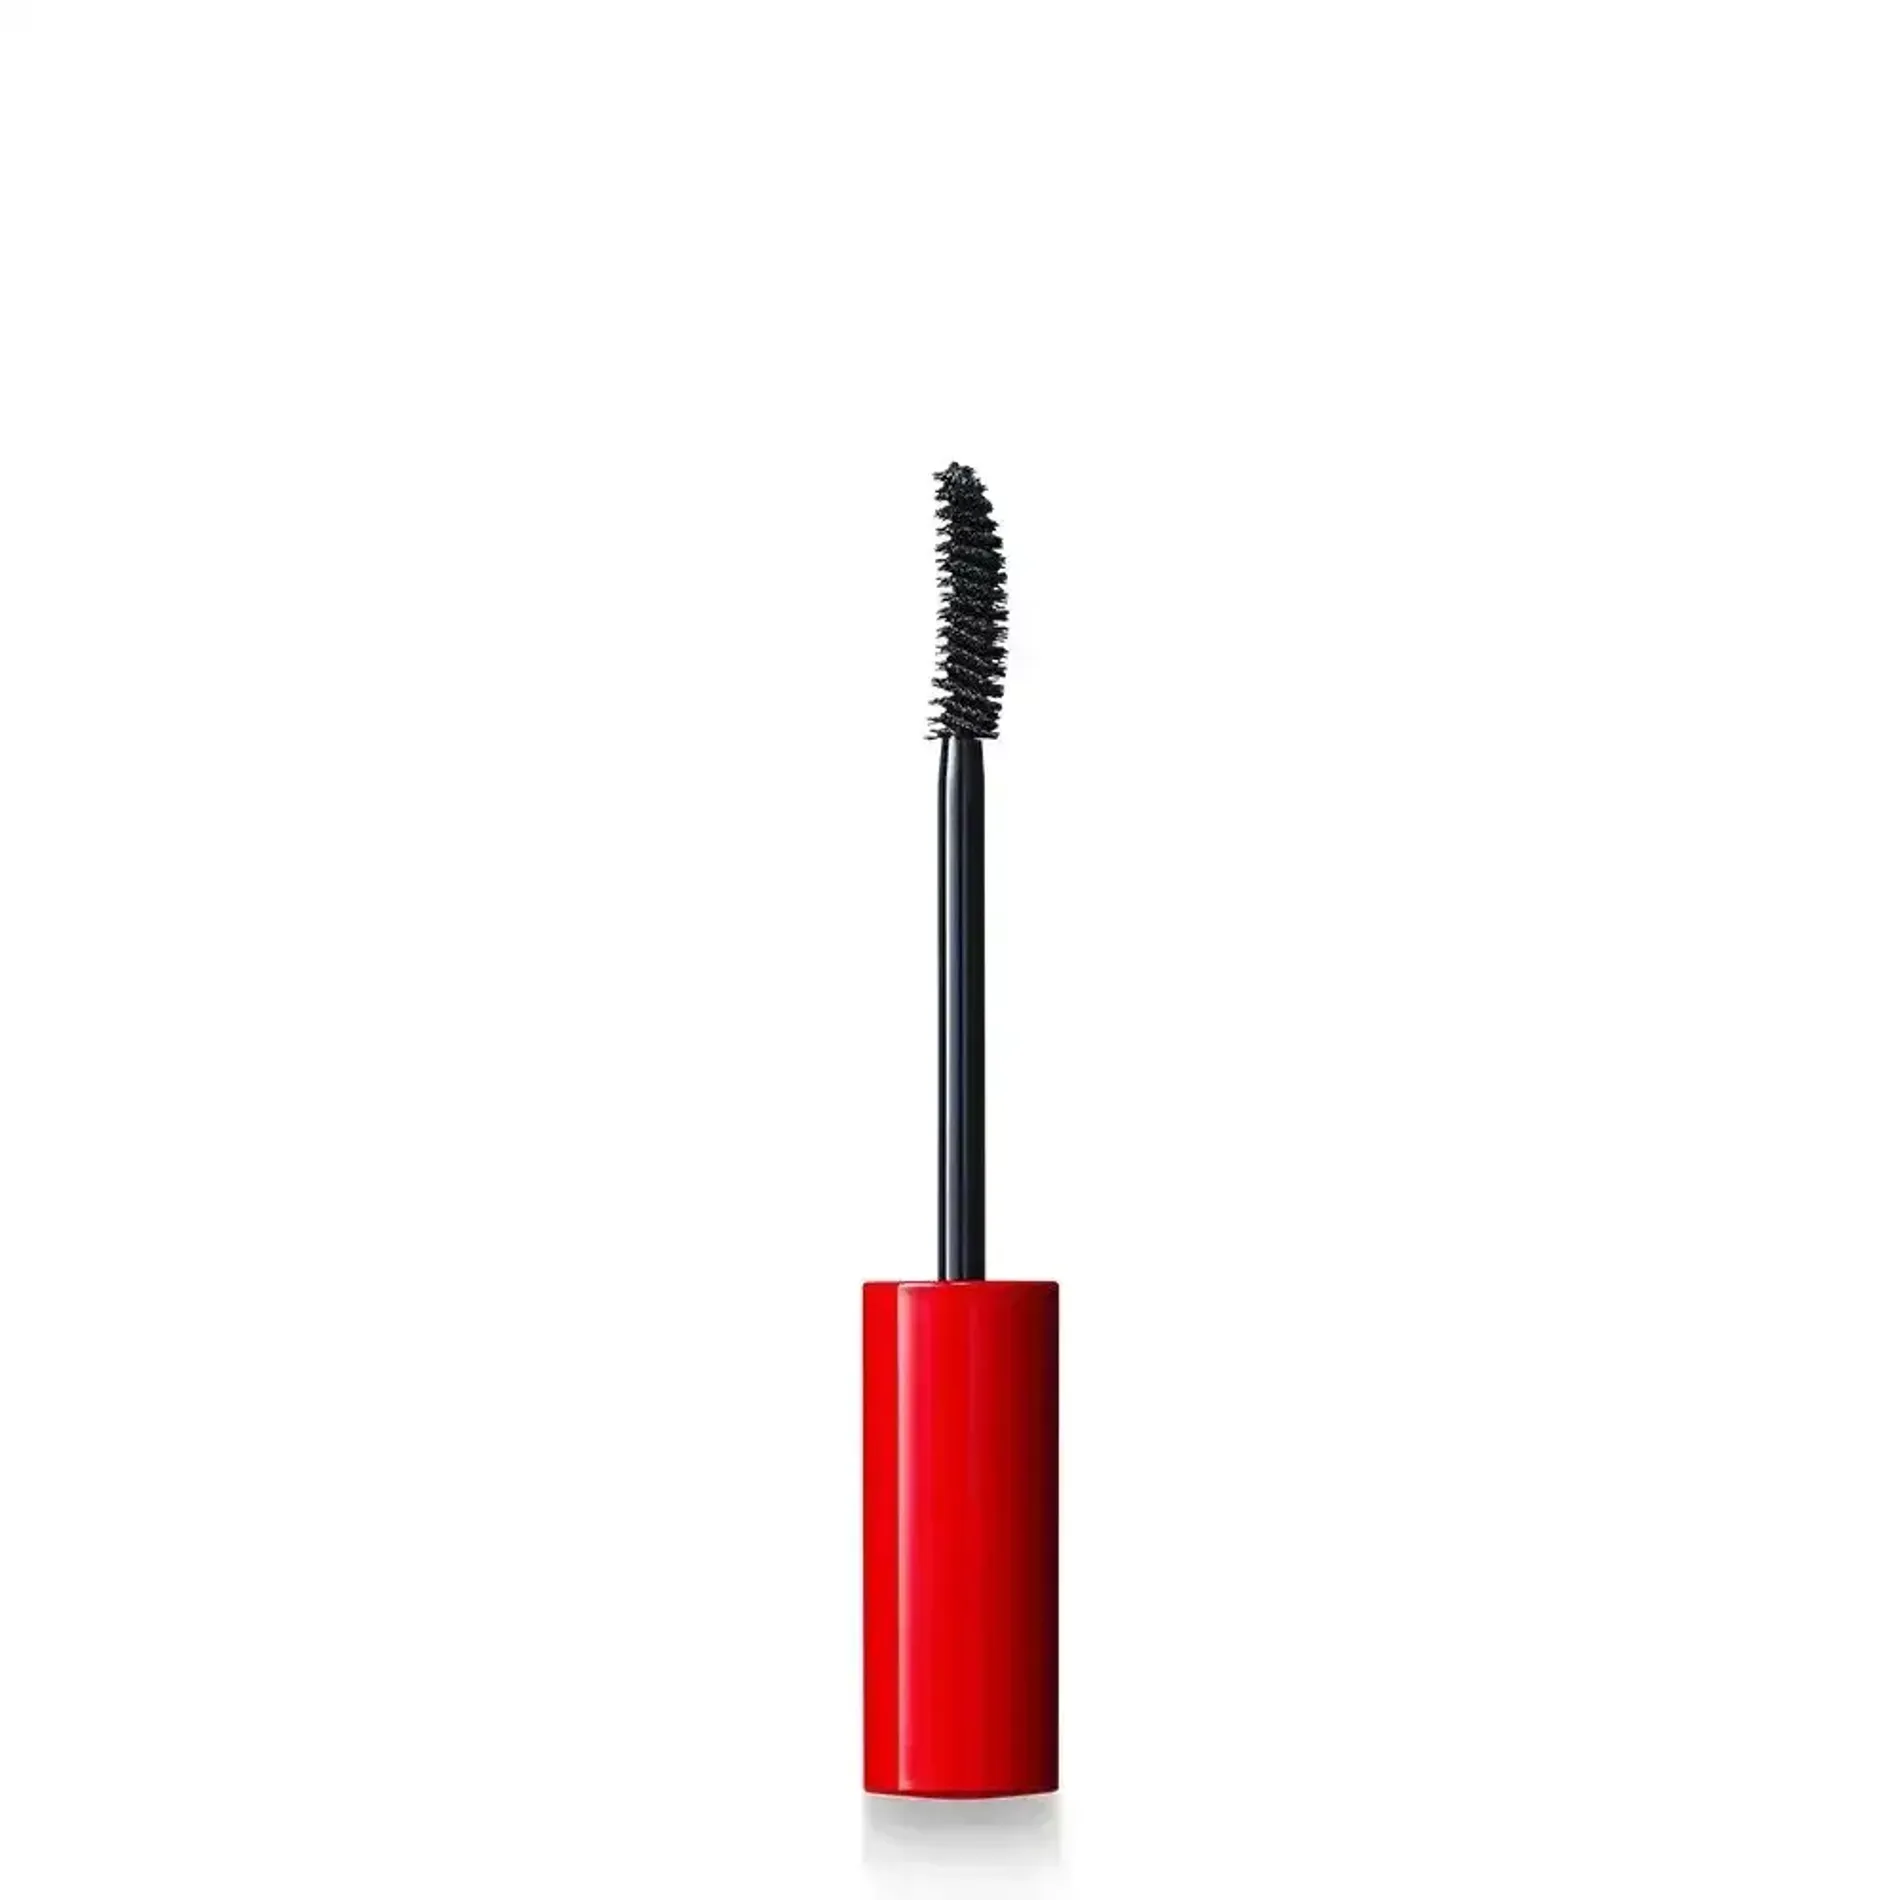 mascara-lam-cong-day-mi-curly-studio-all-day-rise-mascara-01-curly-volume-8g-4